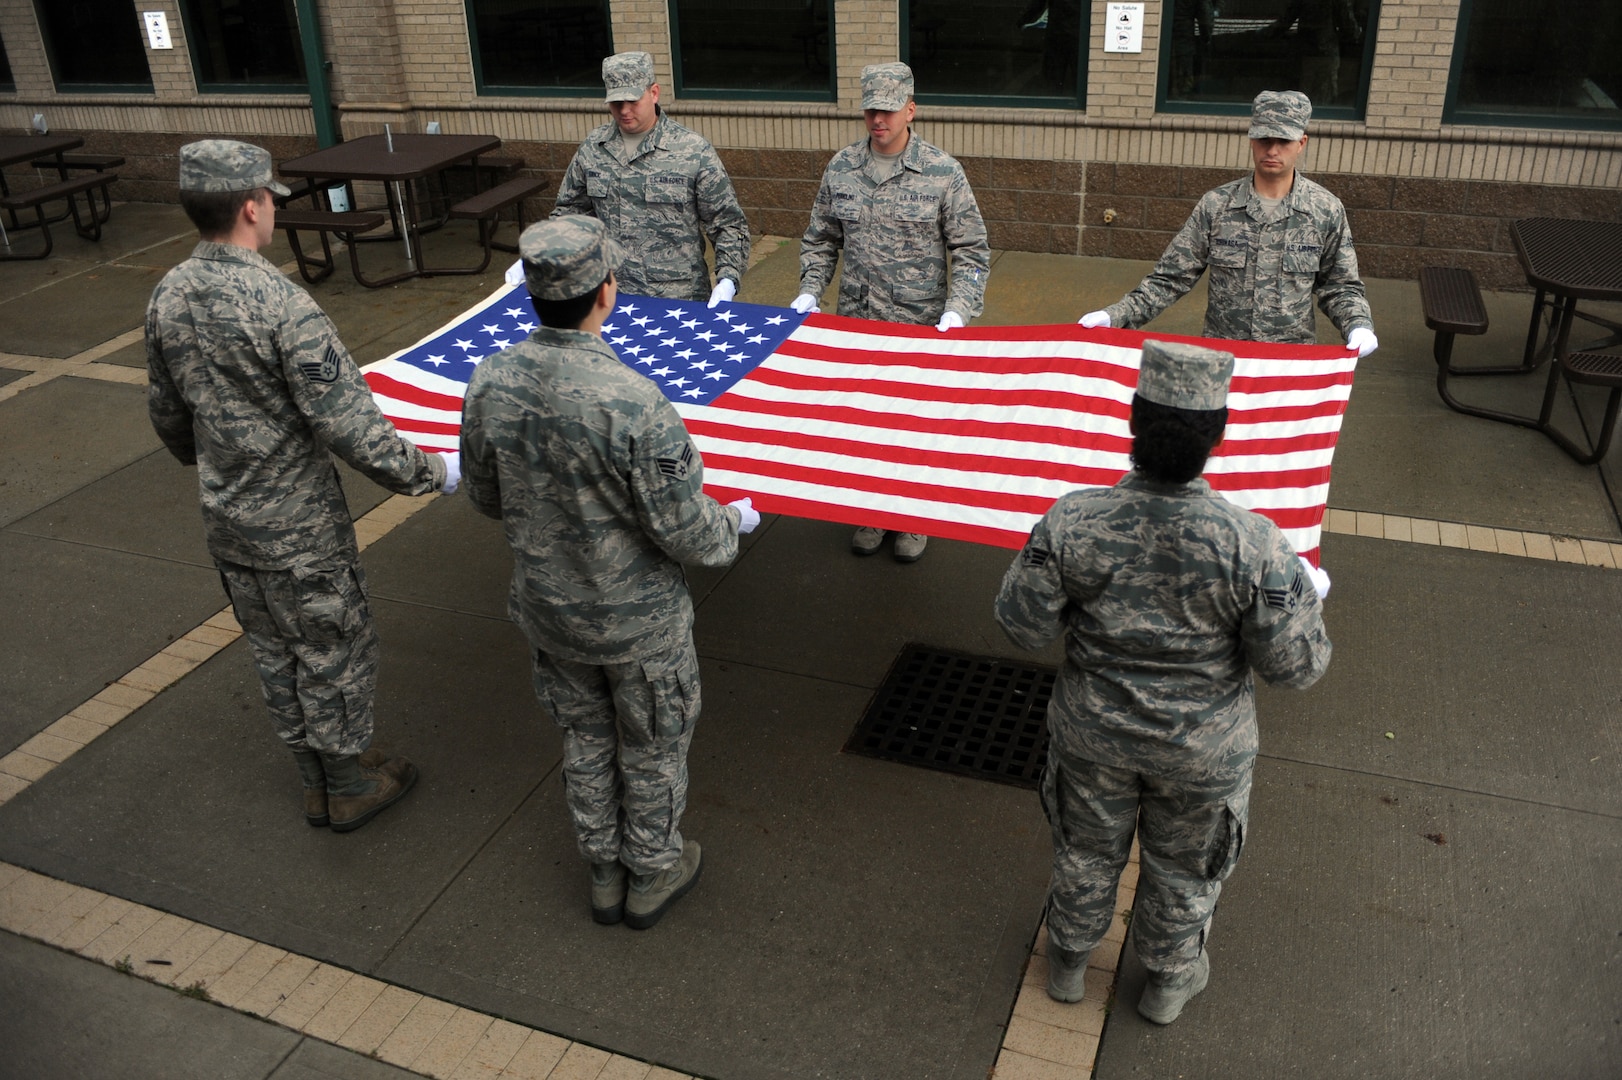 Members of the New York Air National Guard's 106th Rescue Wing Base Honor Guard rehearse a flag folding and presentation ceremony at Gabreski Air National Guard Base Oct. 16, 2014. The Honor Guard Airmen performed more than 619 ceremonies in 2013. This was more than any other Air National Guard Honor Guard in the U.S.